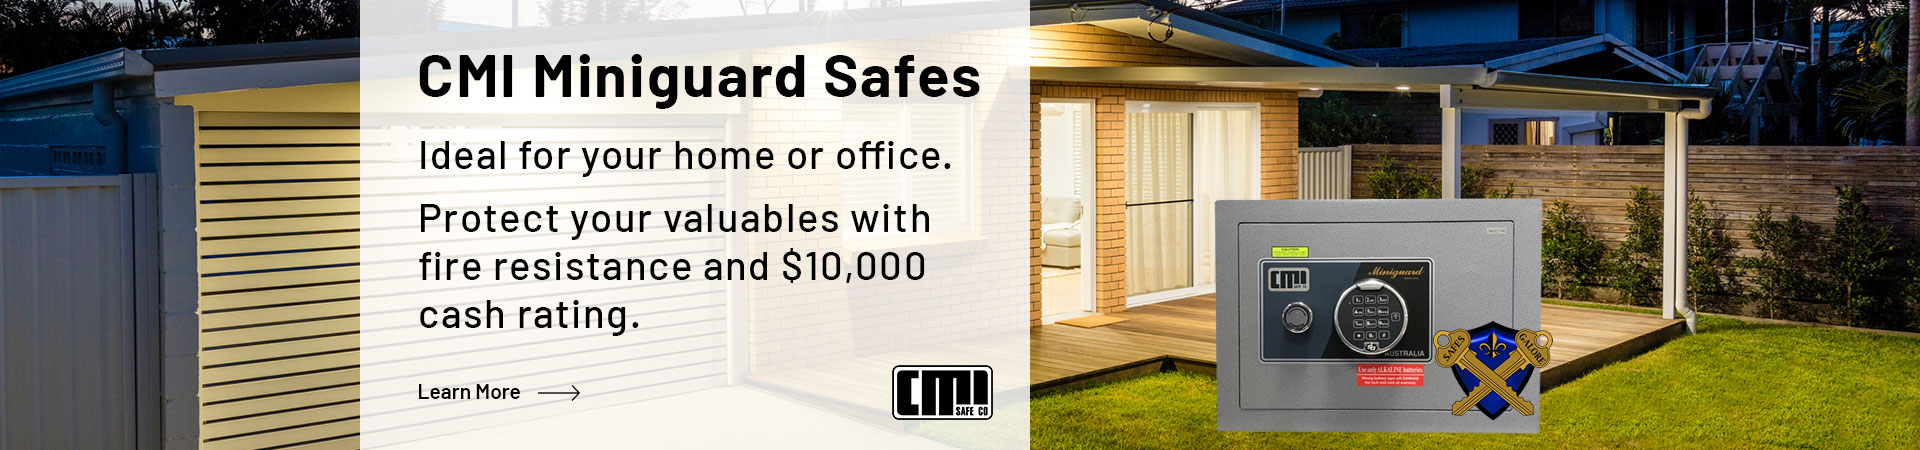 Learn more about the CMI Miniguard Safe range. Protect your valuables with fire resistance and $10,000 cash rating.